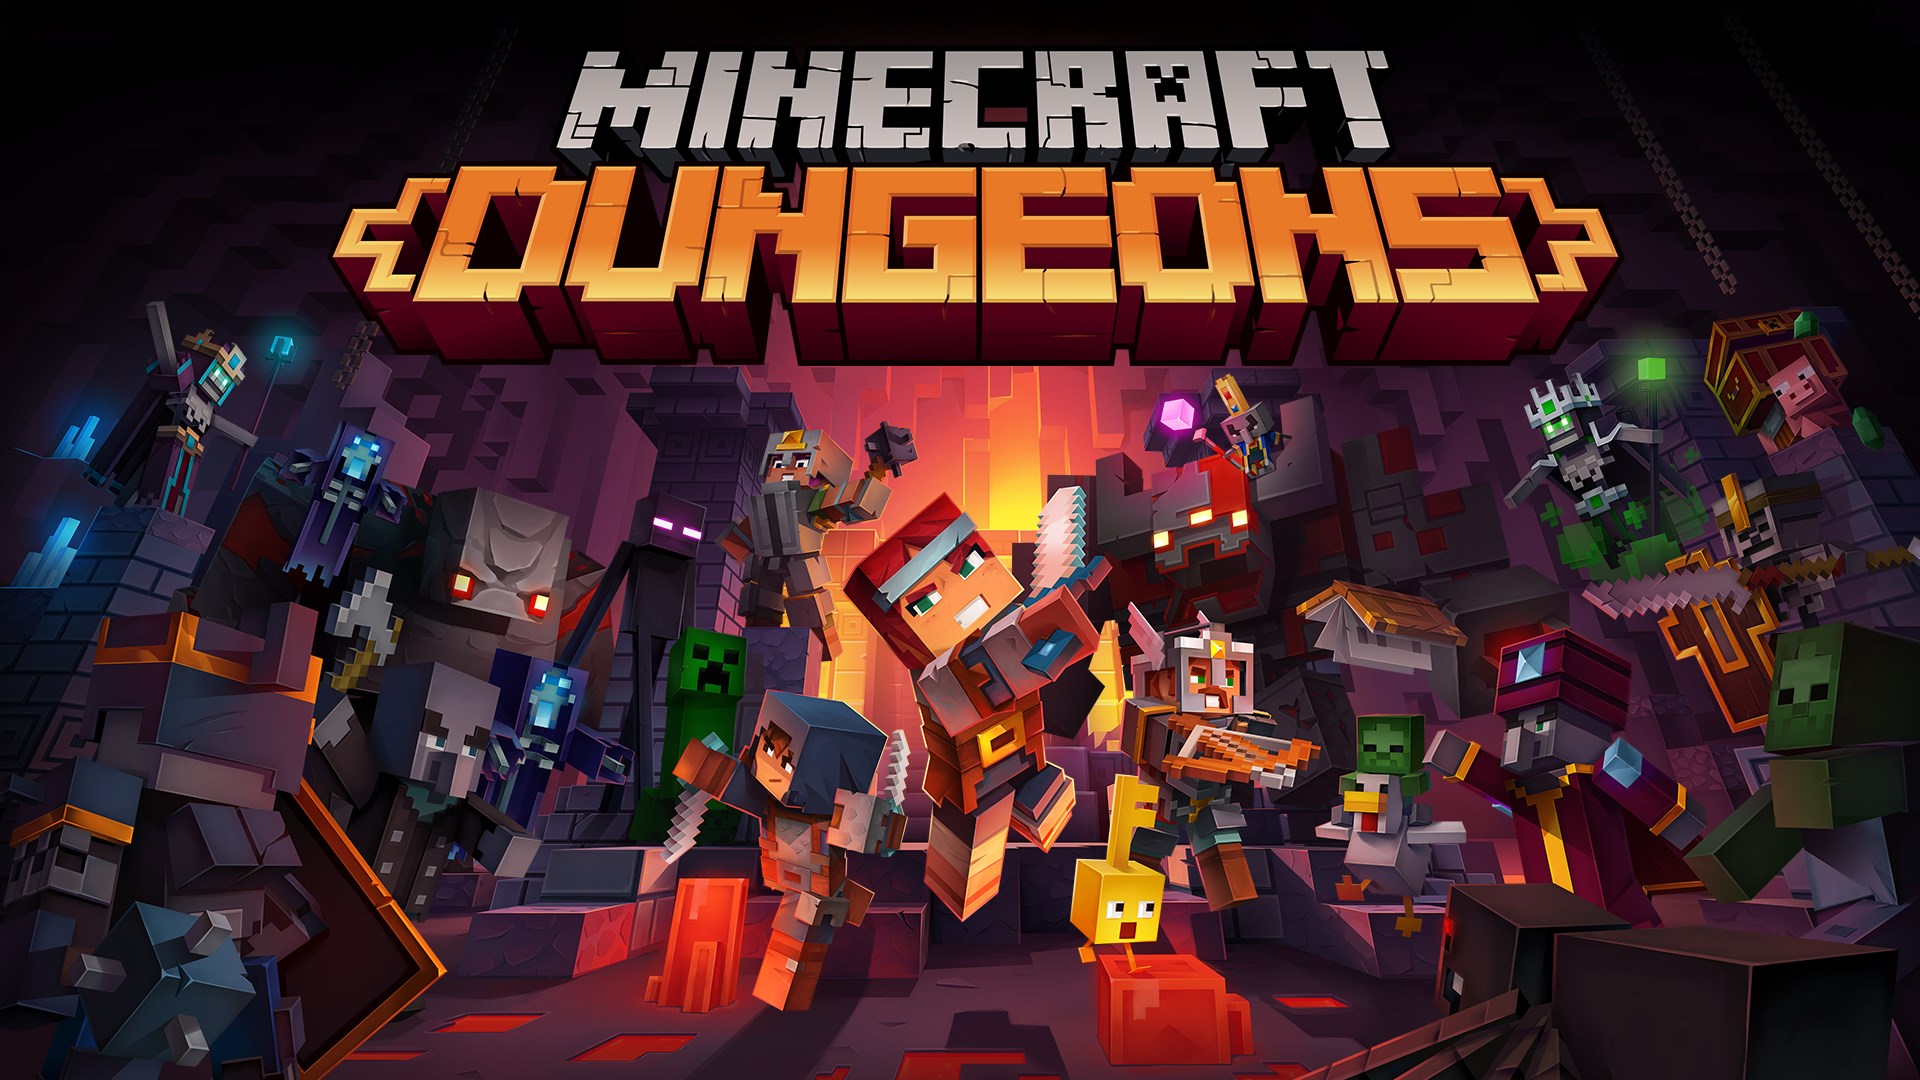 Video For Minecraft Dungeons Is Now Available For Xbox One And Windows 10 (Also Included In Xbox Game Pass)